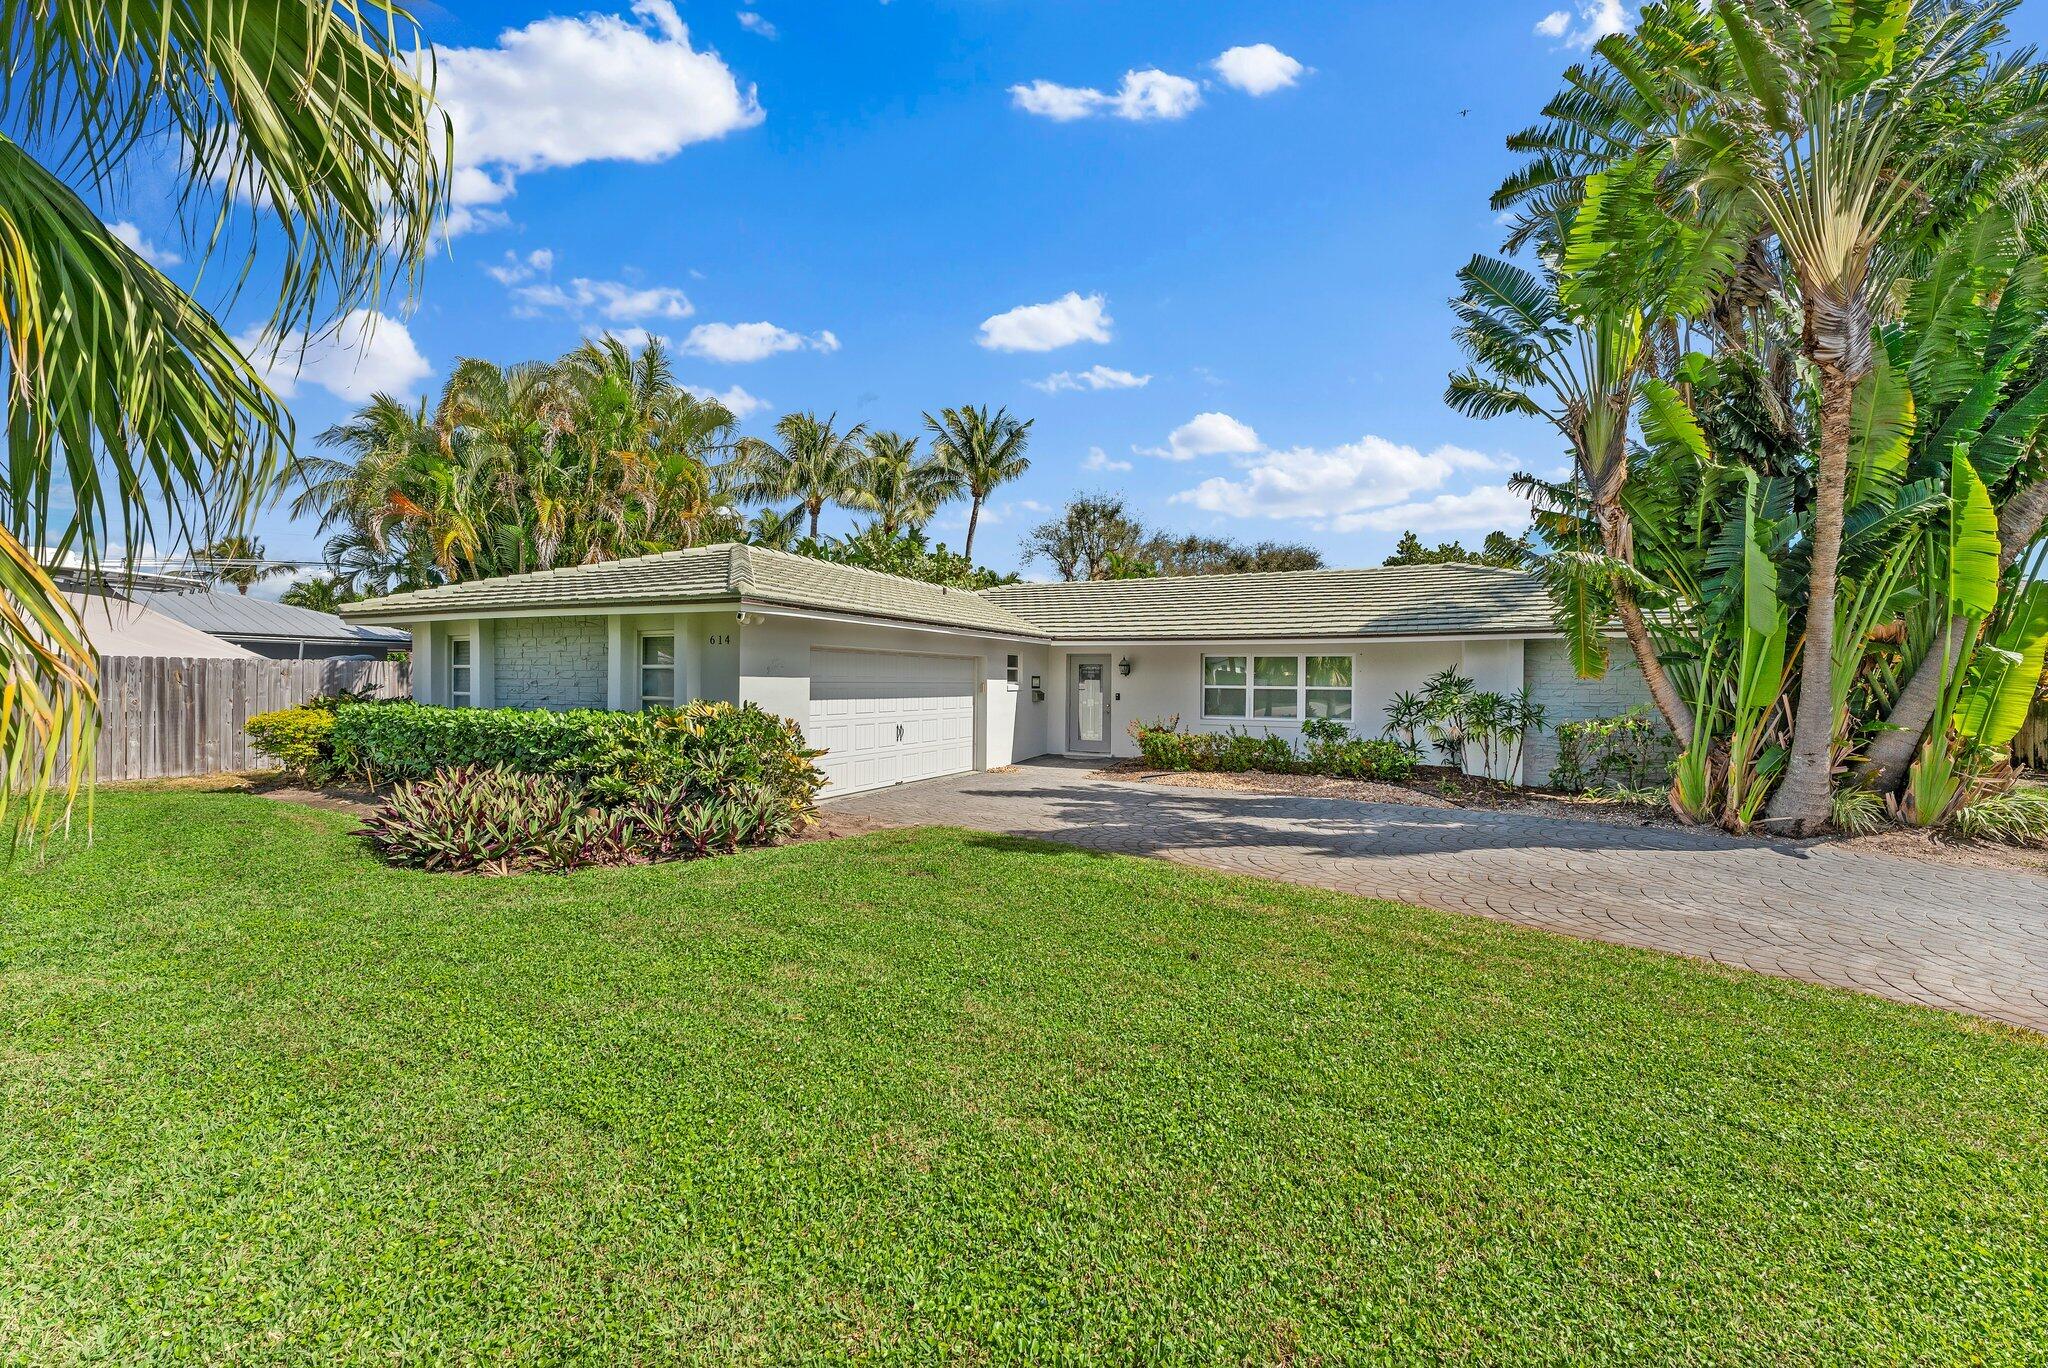 614 Westwind Drive, North Palm Beach, Miami-Dade County, Florida - 3 Bedrooms  
3 Bathrooms - 